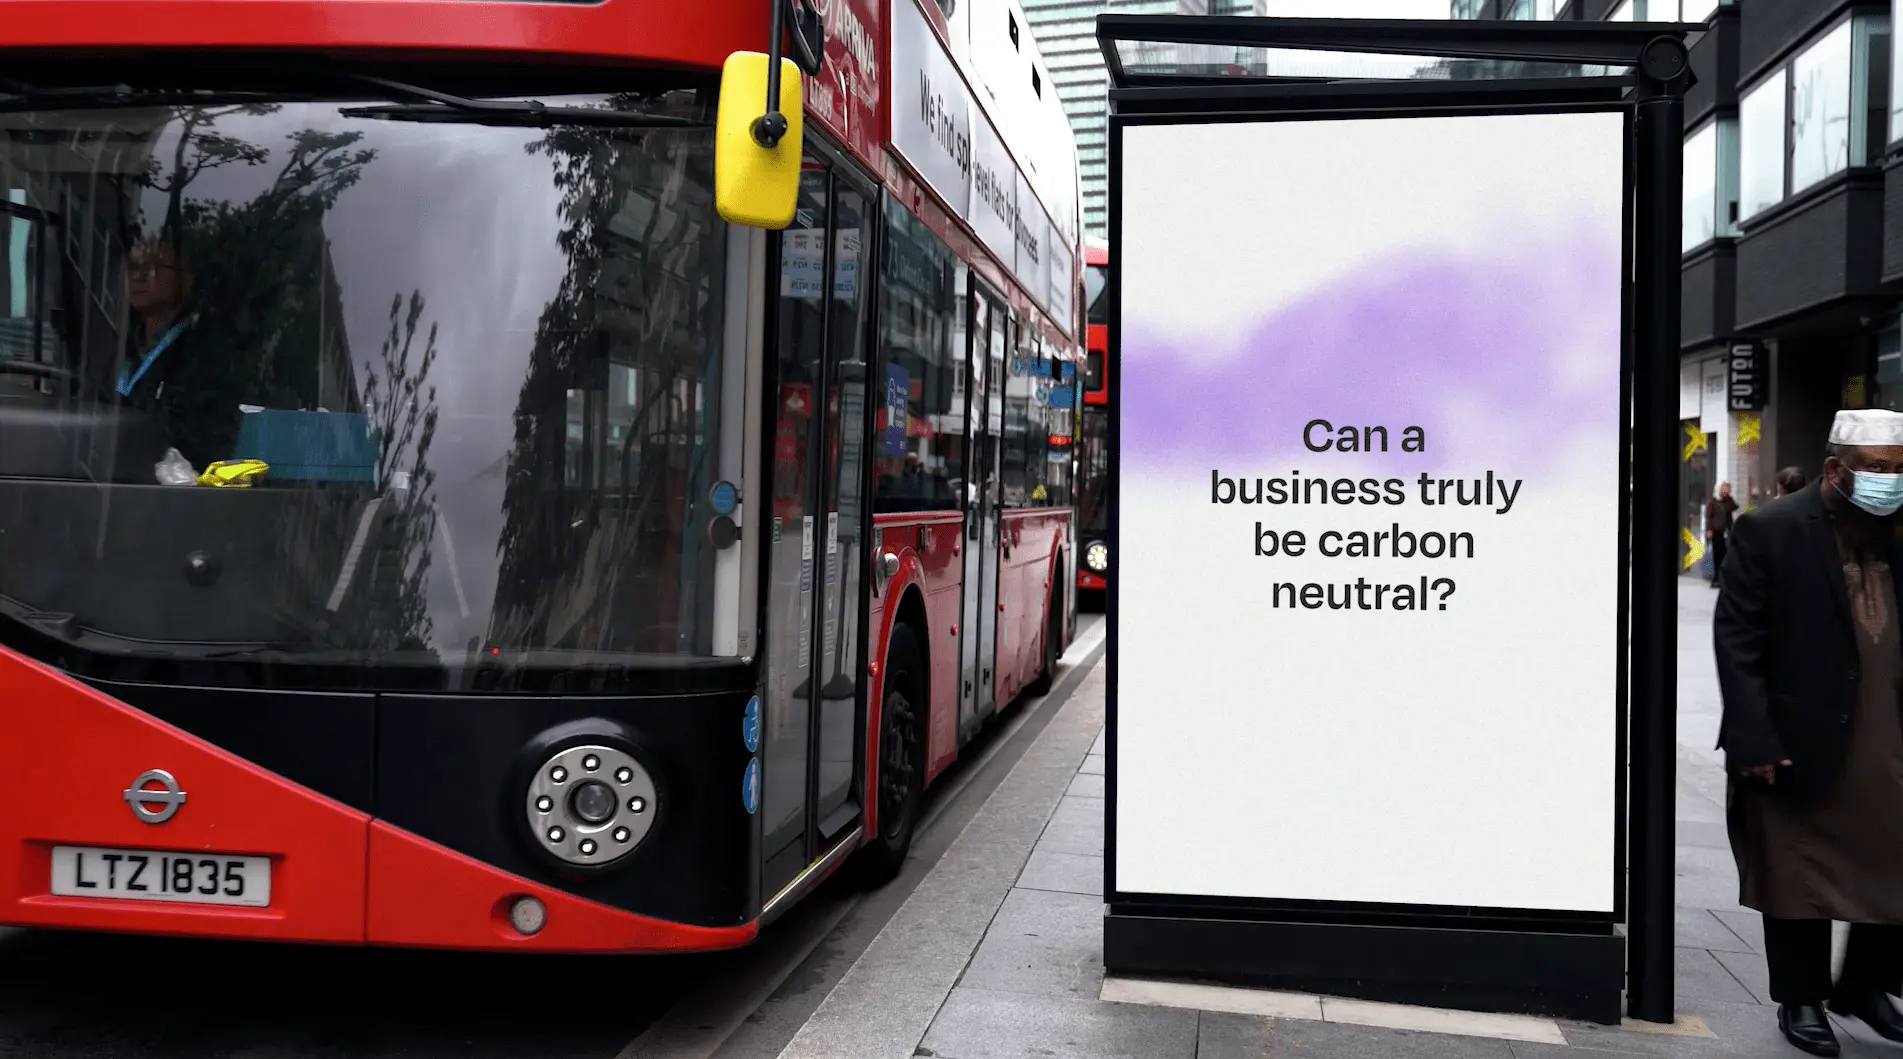 Bus stop -  brytr uk - sustainable marketing agency London - green, ethical and eco marketing